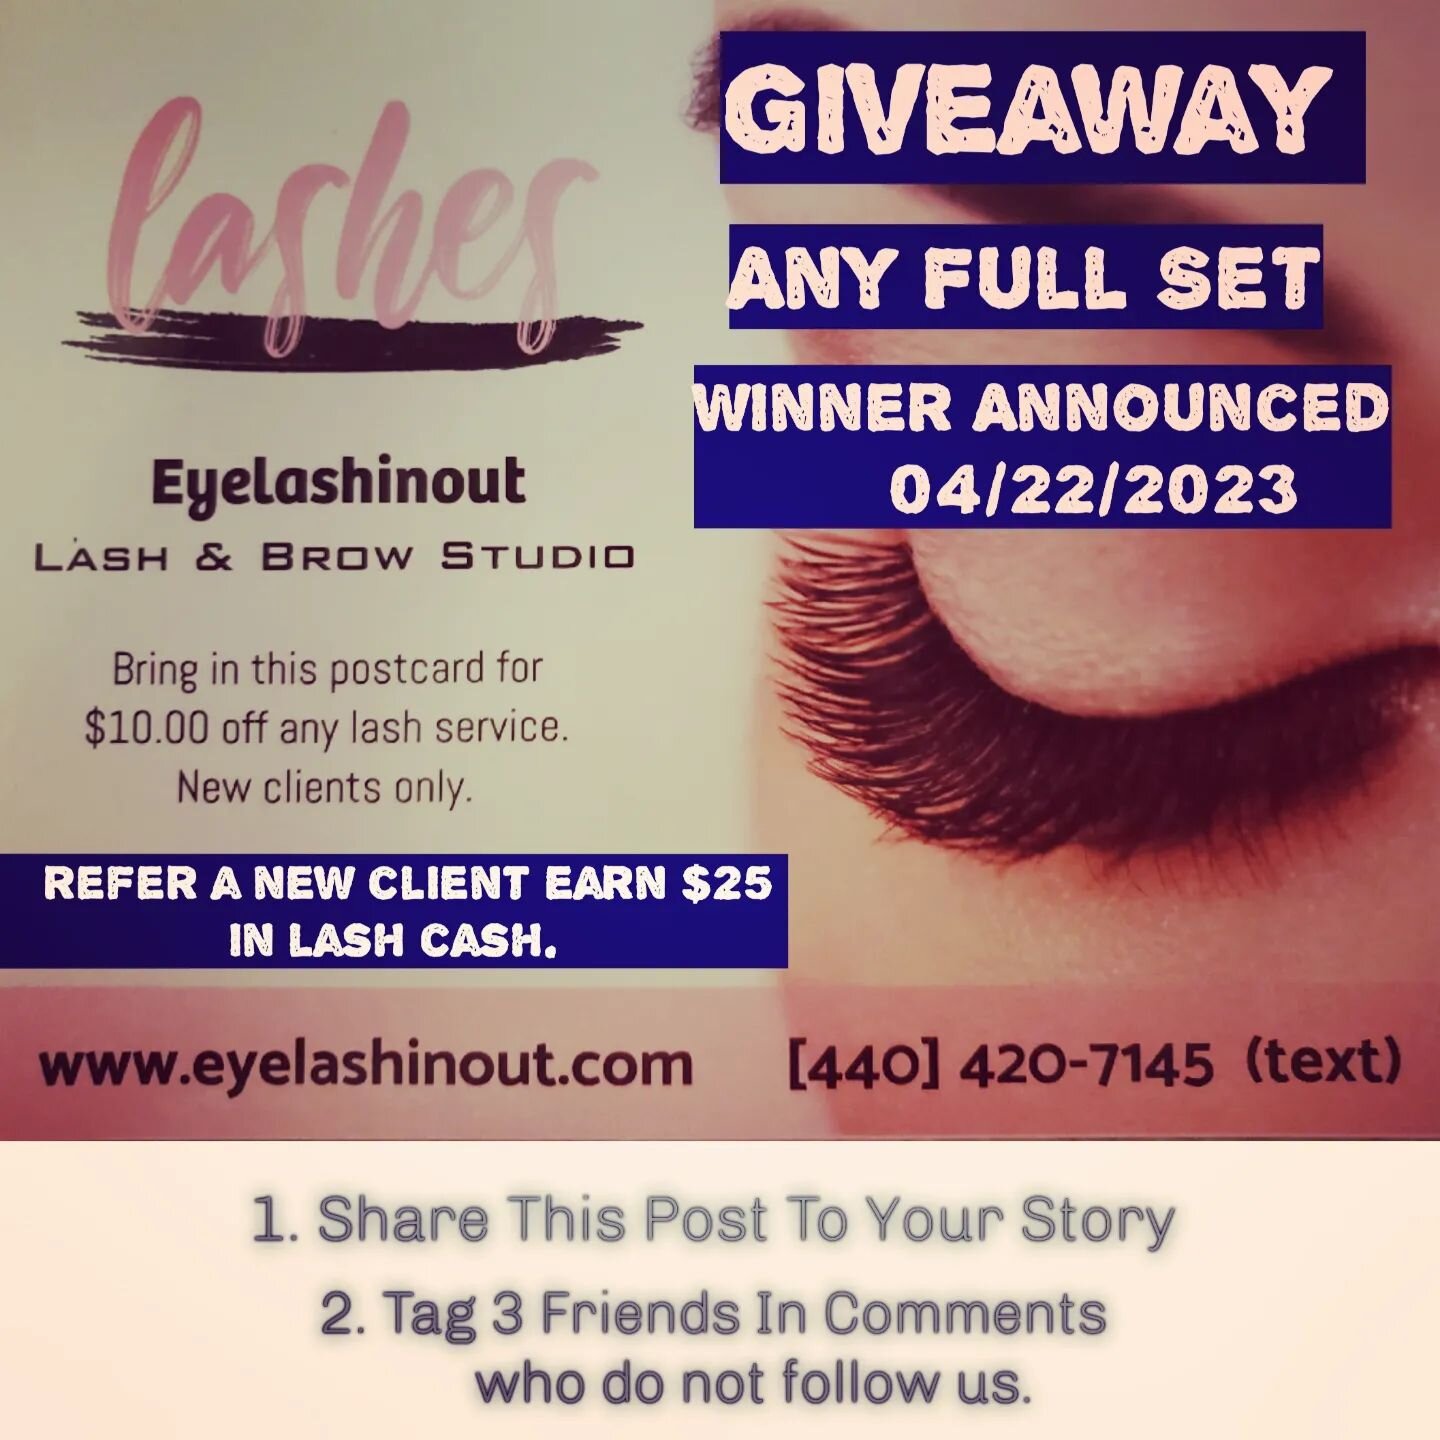 Its Easter Weekend 🐰  We're too egg-cited about this Giveaway 🐣
Winner will have a guaranteed appointment for Prom or Grad lashes.  Otherwise appointment will be within 30 days of winners announcement. 
Please follow all steps.  All qualifications 